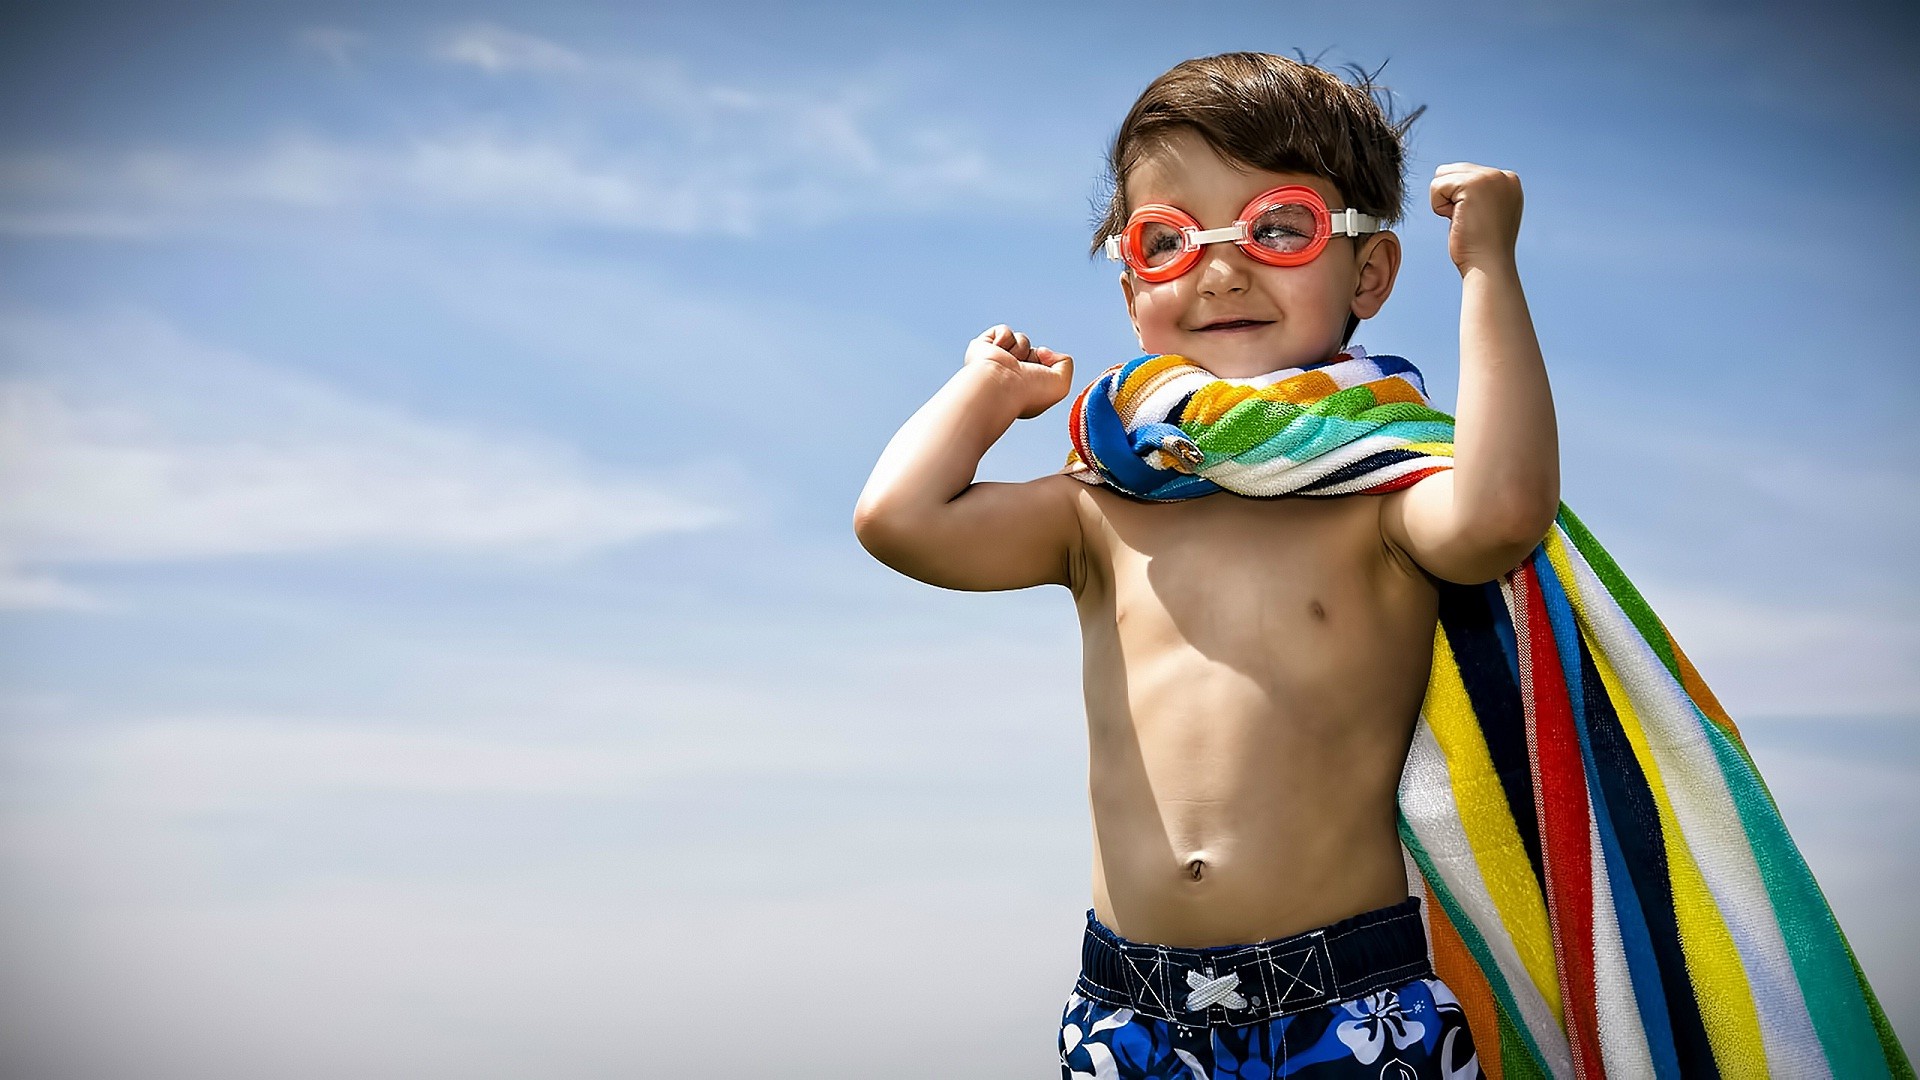 boy pictures wallpaper,vacation,fun,muscle,summer,sky